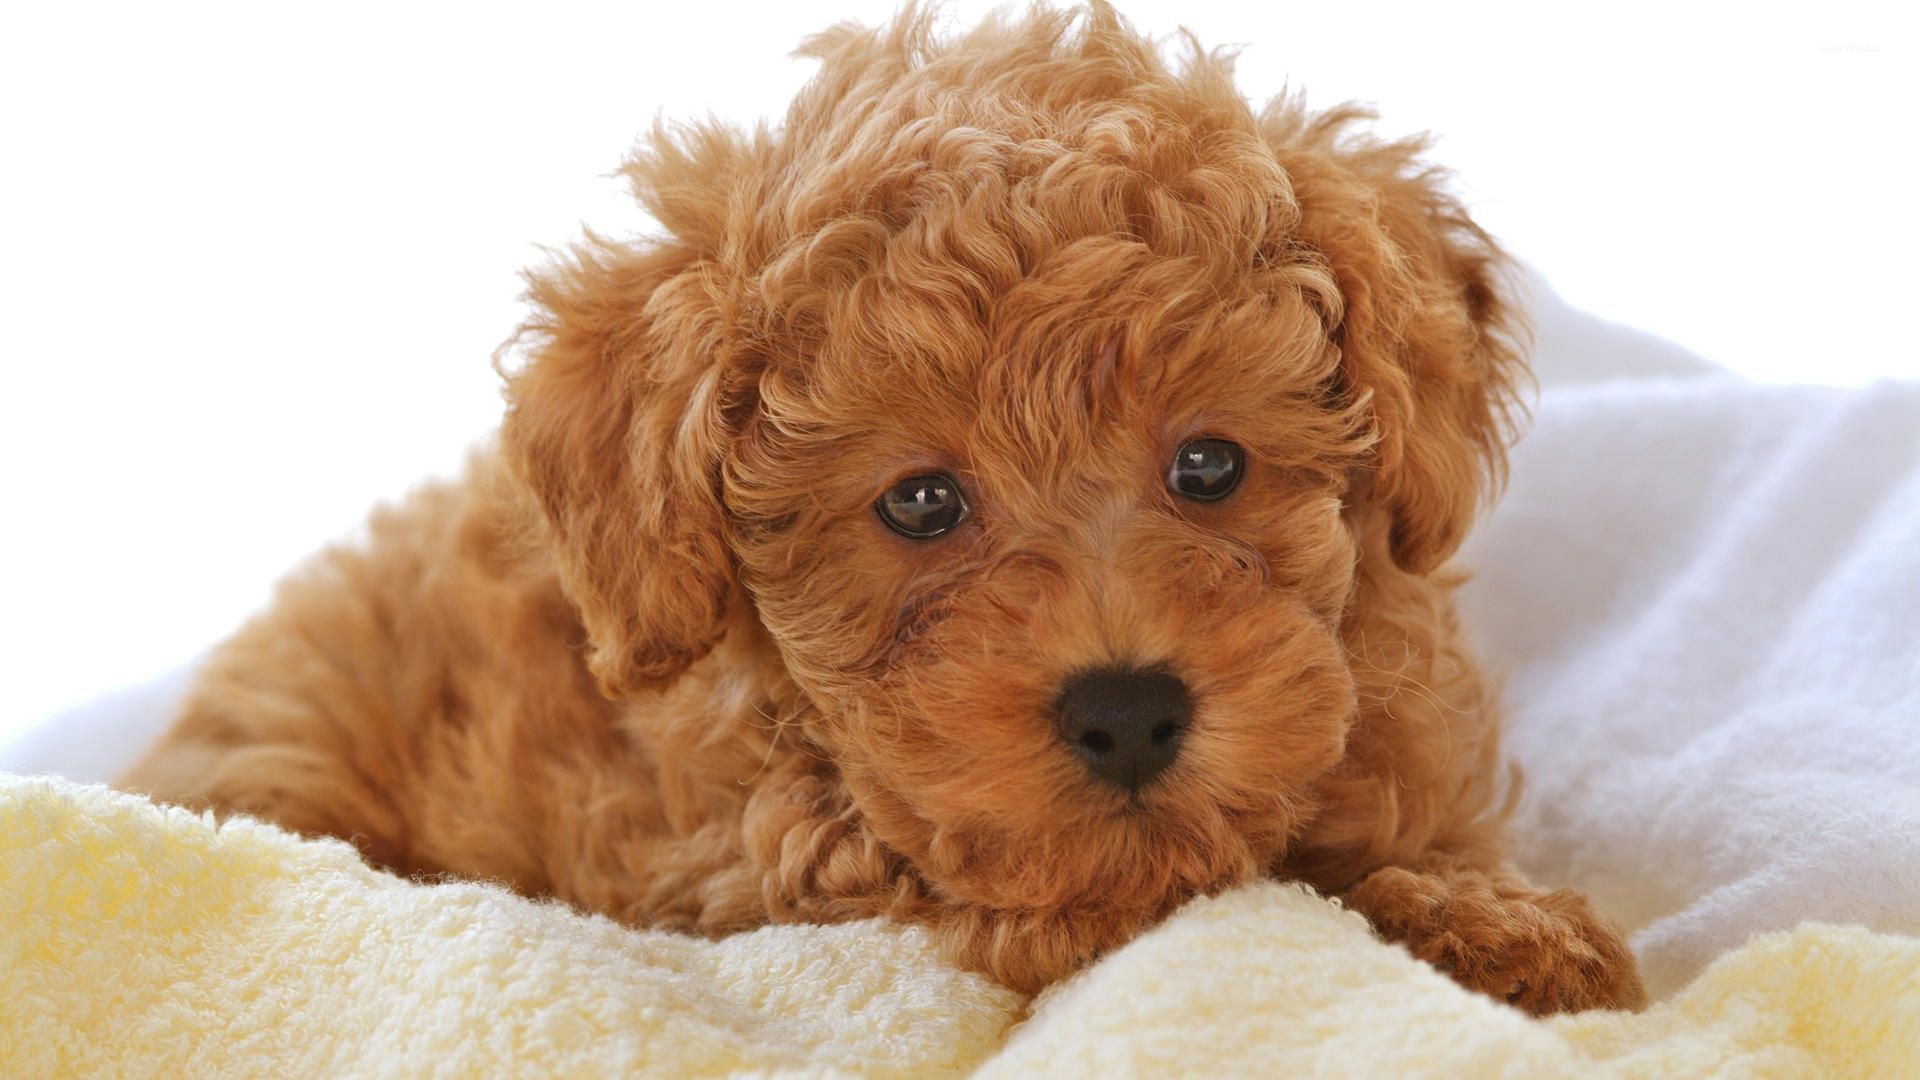 Brown fluffy puppy on a blanket wallpaper - Animal wallpapers - #52599